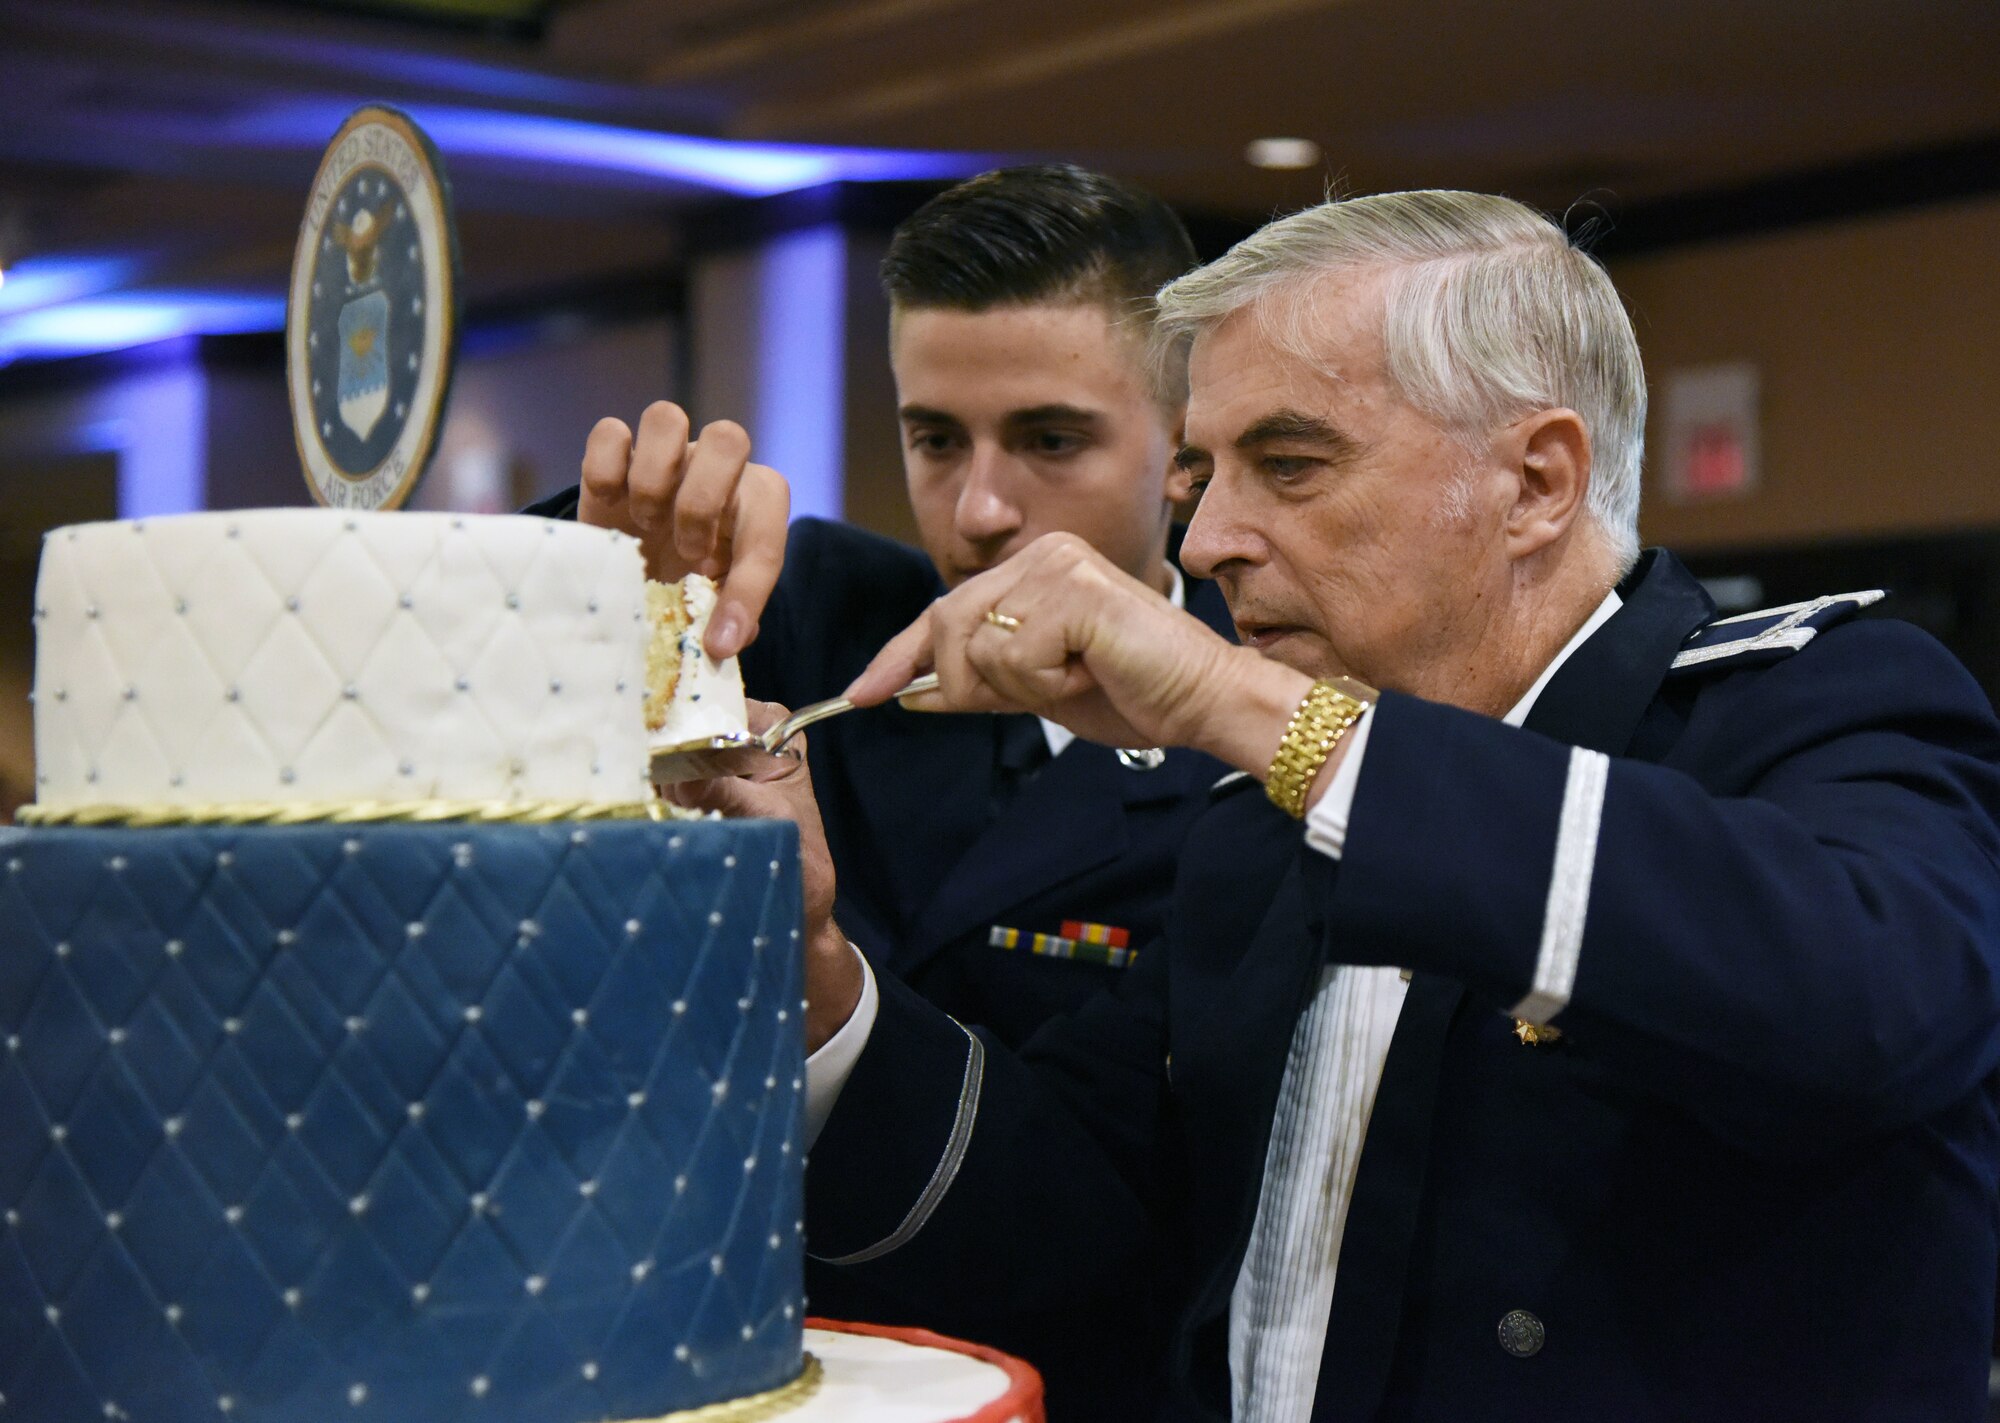 U.S. Air Force Airman 1st Class Warren Crouch, 334th Training Squadron student, and retired Col. Thomas Adams, participate in a cake cutting ceremony the U.S Air Force 71st Birthday Ball at the Imperial Palace Casino, Biloxi, Mississippi, Sept. 22, 2018. The event was hosted by the 81st Training Wing and the John C. Stennis Chapter Air Force Association. (U.S. Air Force photo by Kemberly Groue)